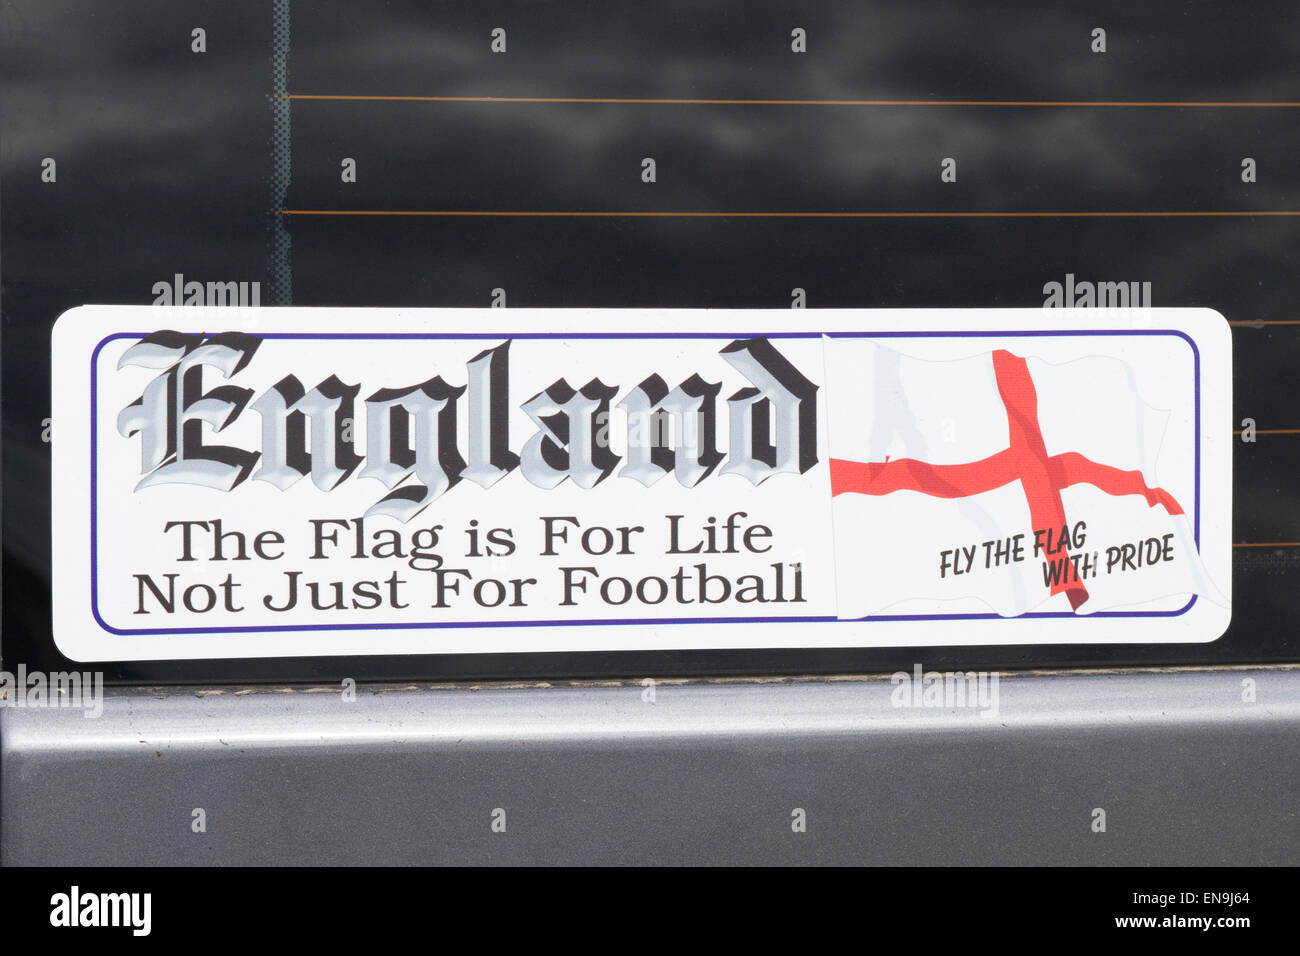 Stickers on a Volkswagen Camper van England 'The Flag is for life not just for Football' Stock Photo